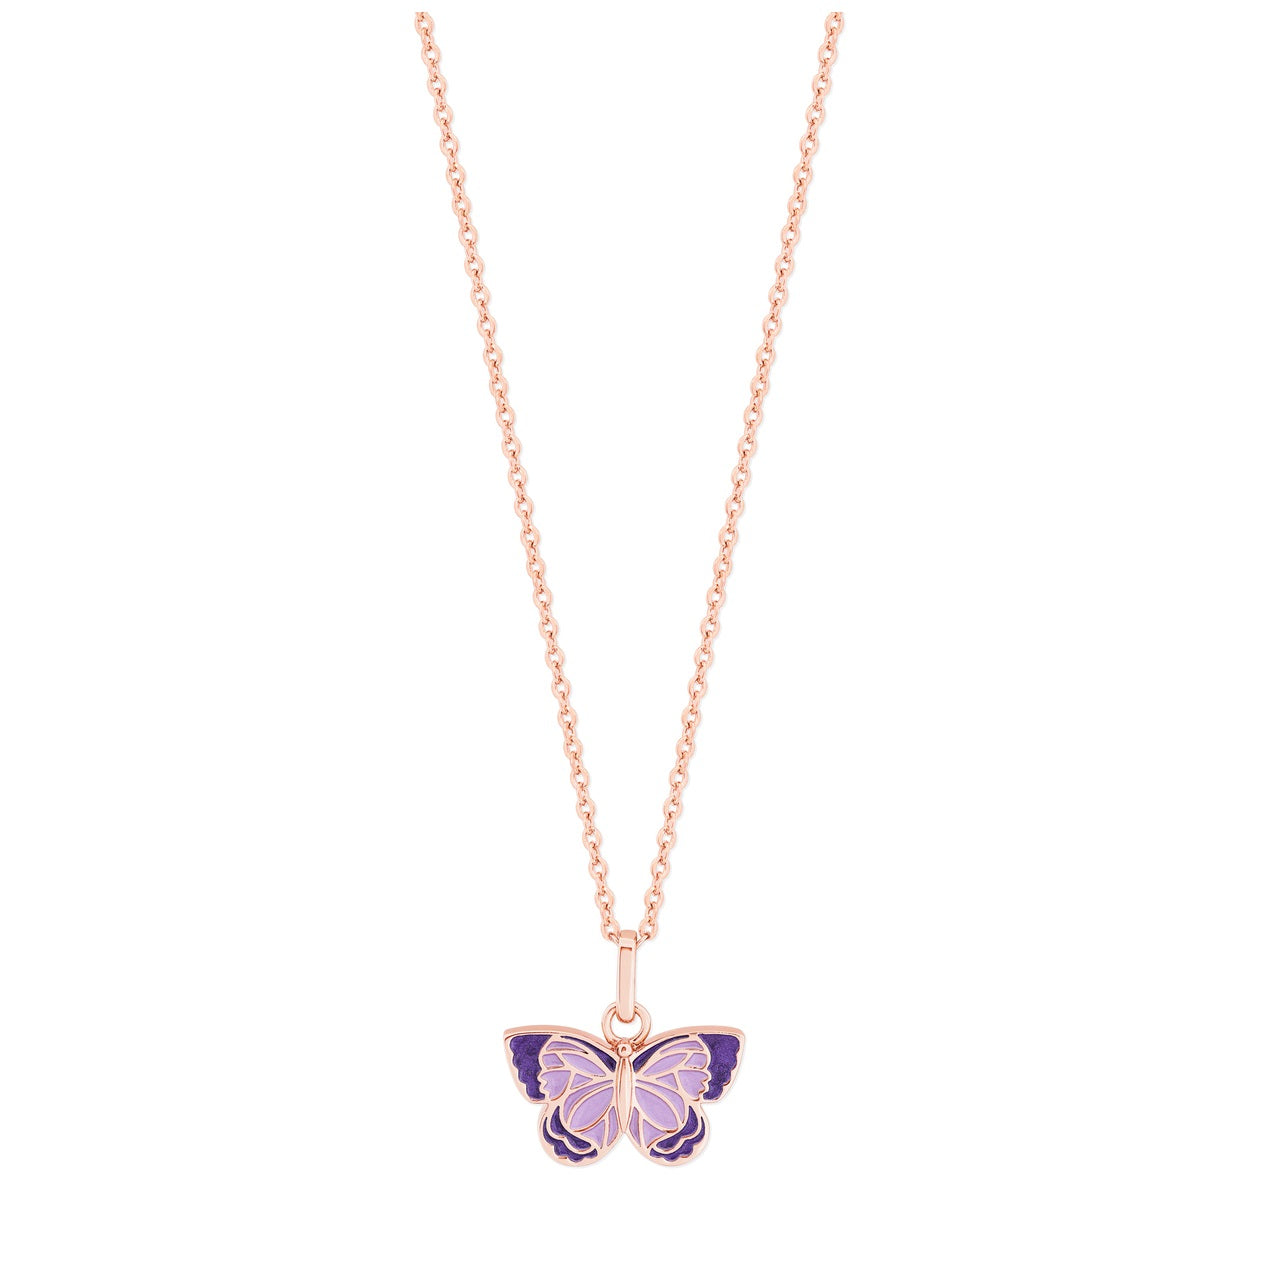 Tipperary Crystal Butterfly Purple & Rose Gold Pendant  This exquisite piece consists of a polished rose gold butterfly filled with dark purple and lilac pearlescent enamel, it suspends from a shimmering rose gold 45cm cable chain with adjustable slider to get the perfect fit.